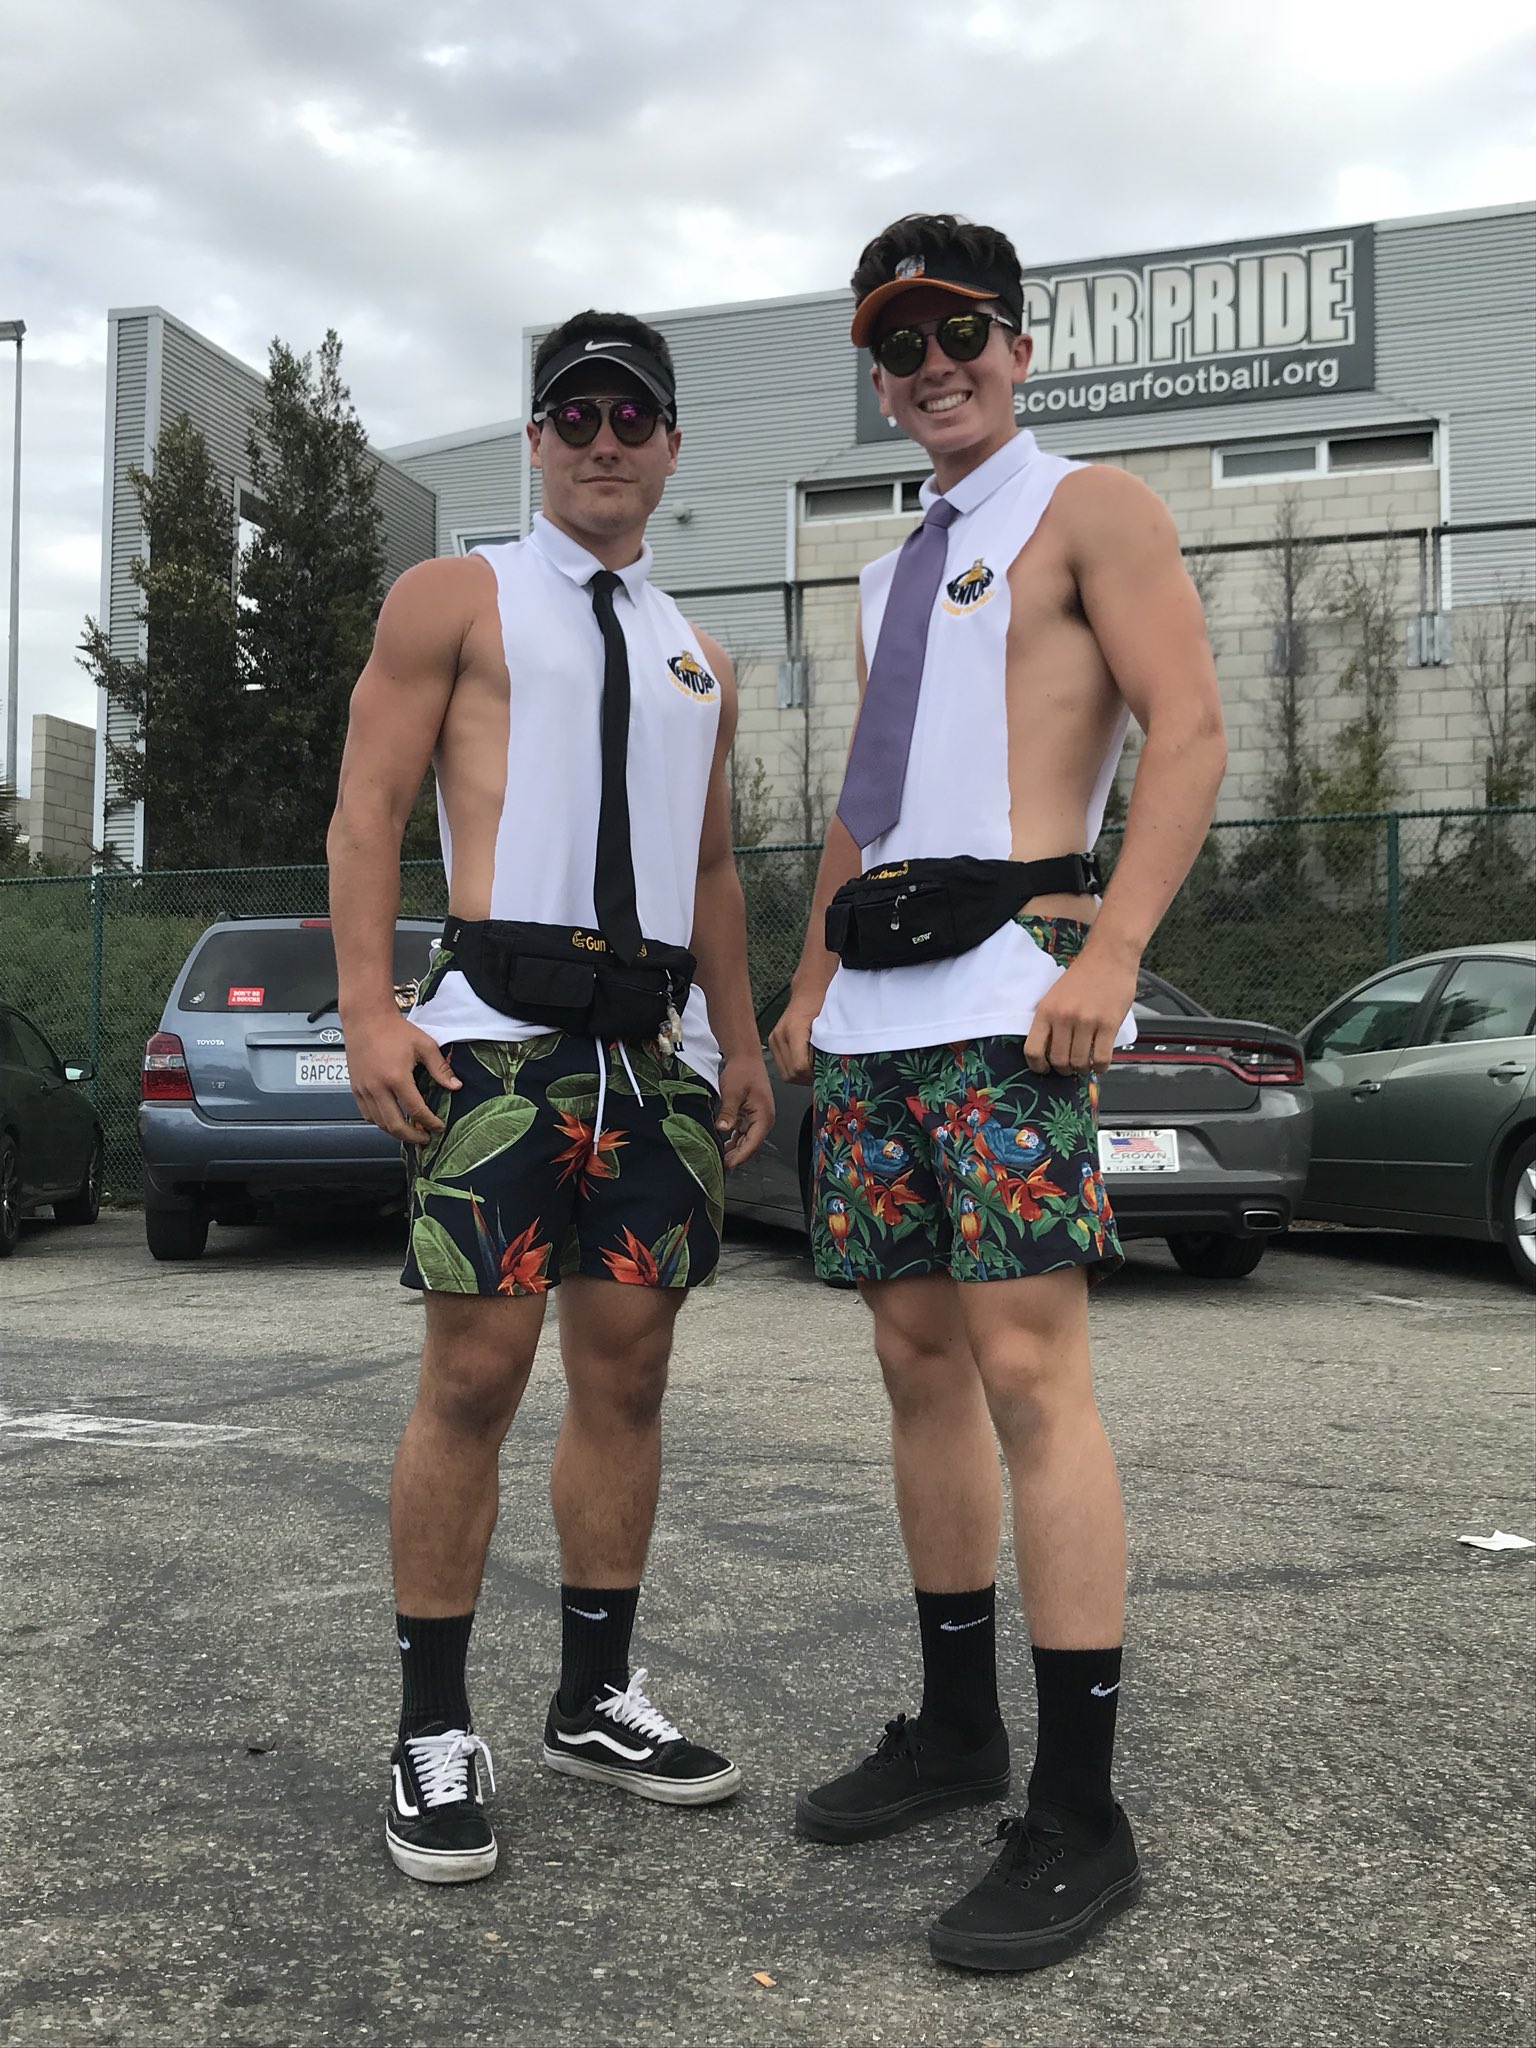 The Cougar Press on Twitter: "Senior Noah and junior Rourke Rieman match with black visors, sunglasses, cut football polos, neckties, embroidered fanny packs, floral socks and vans! https://t.co/5F5zBDOLJD" /